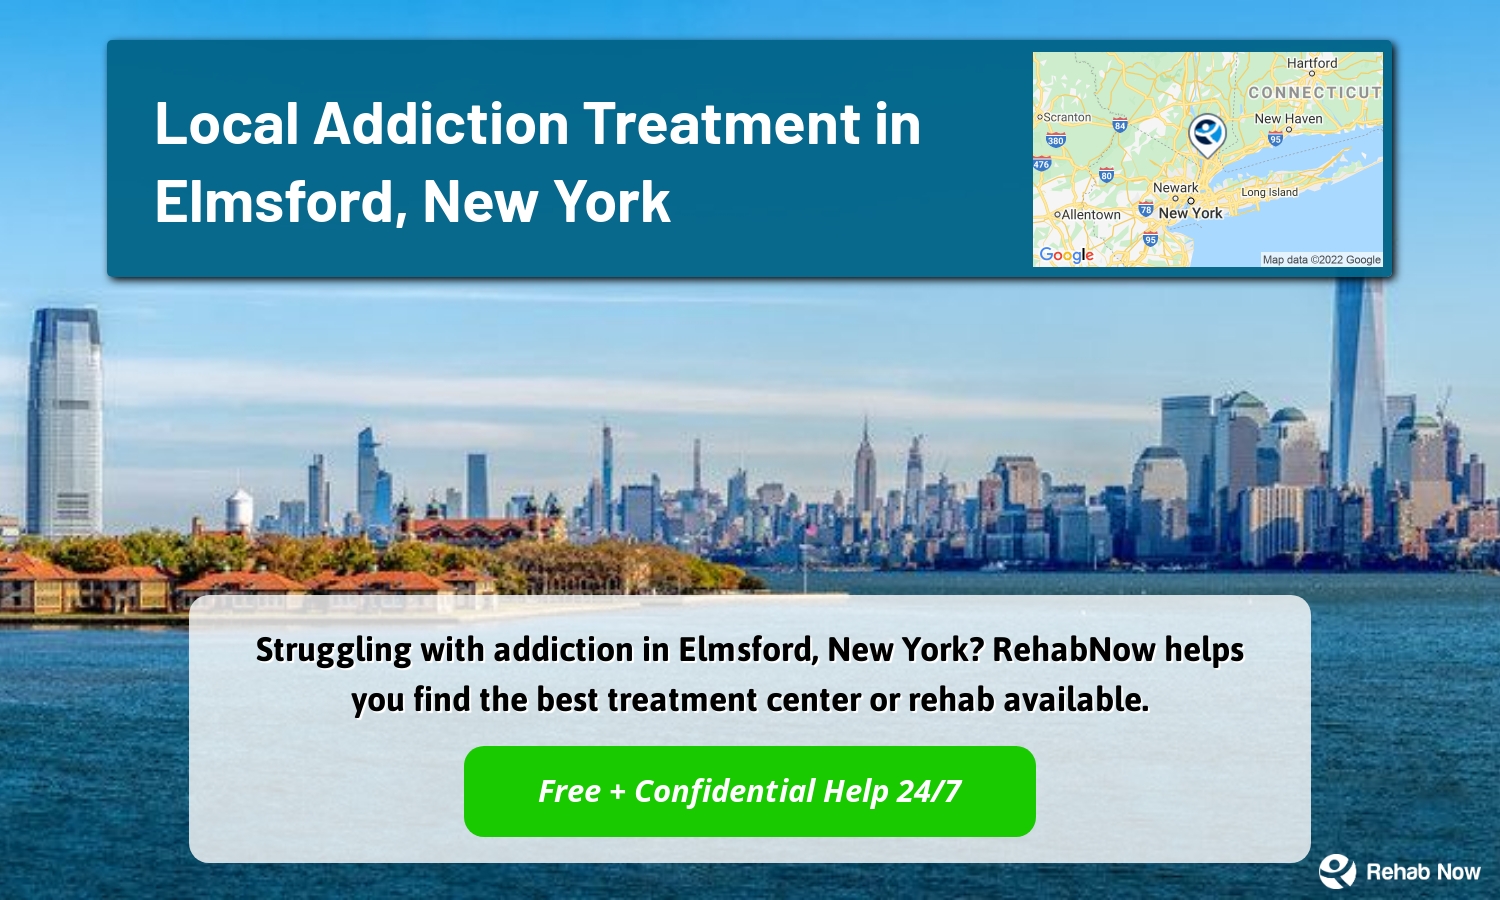 Struggling with addiction in Elmsford, New York? RehabNow helps you find the best treatment center or rehab available.